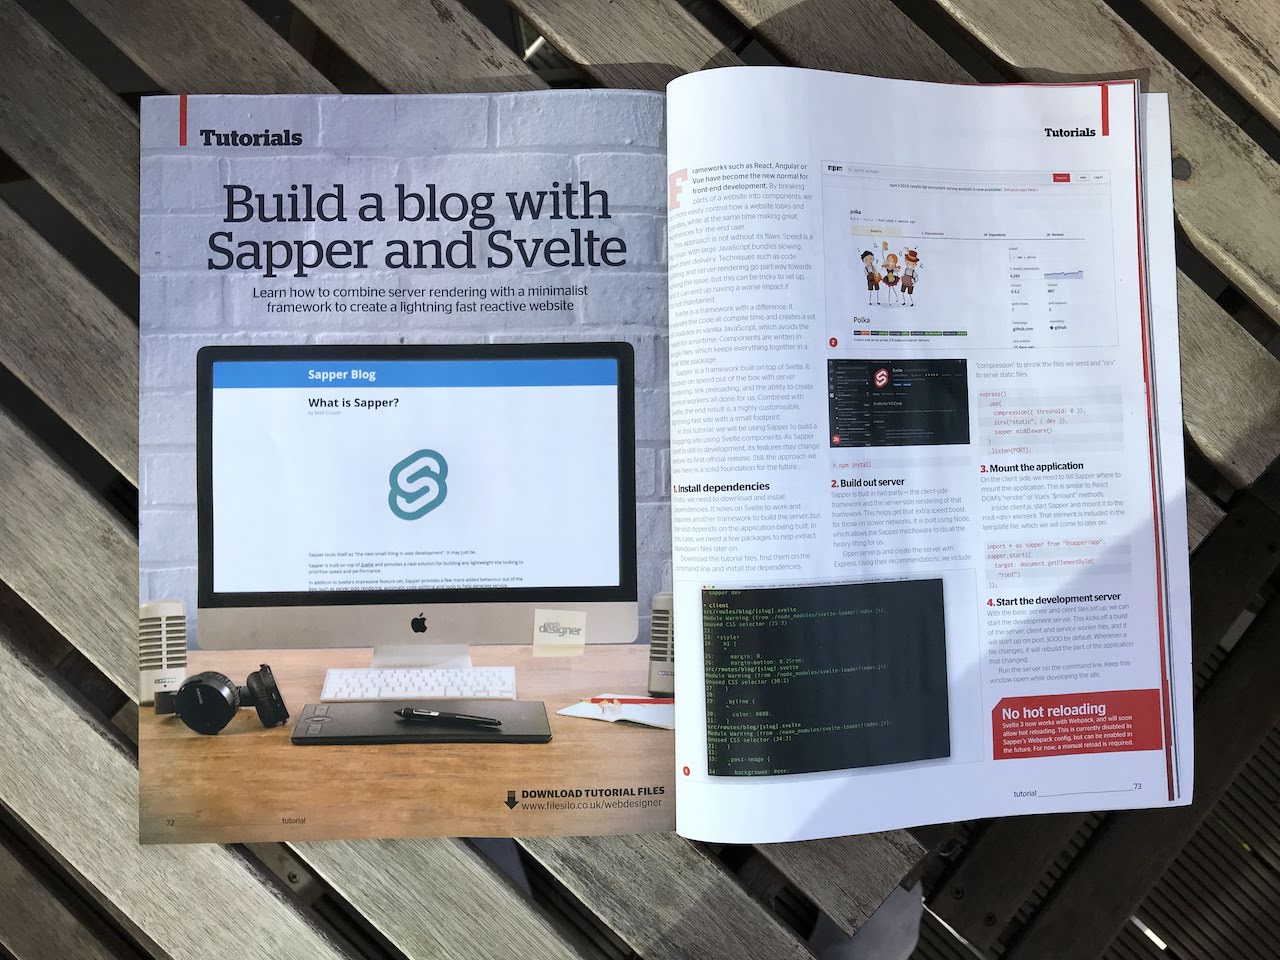 Build a blog with Sapper and Svelte